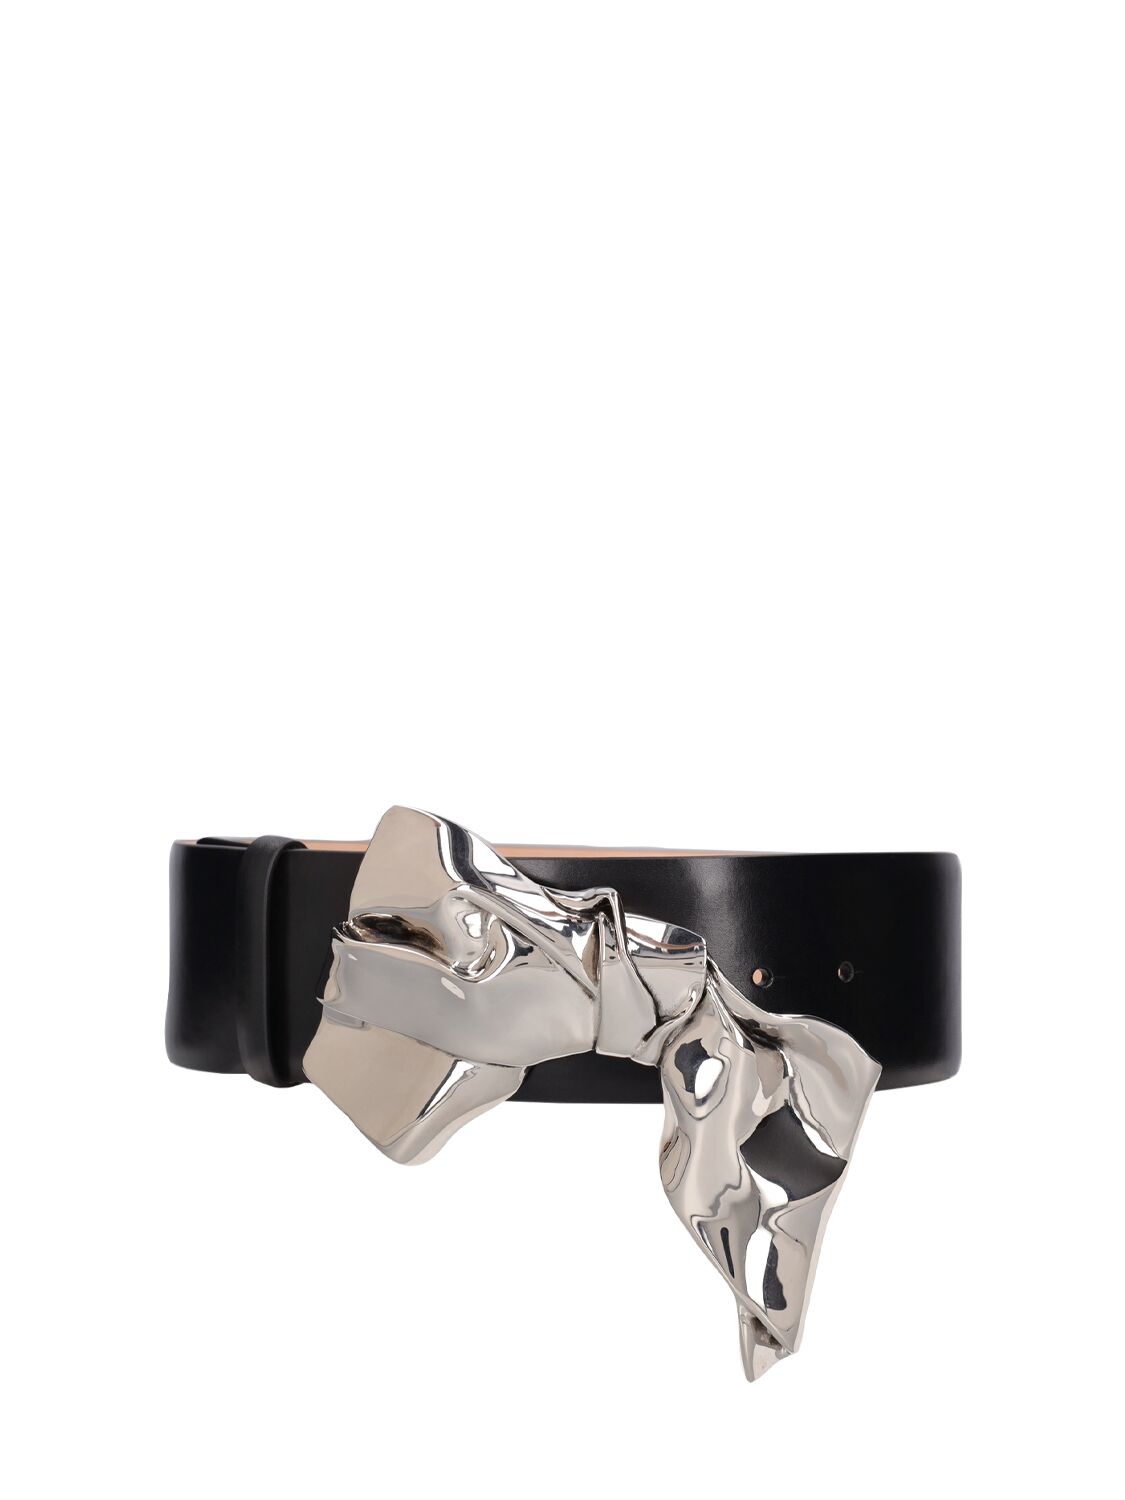 Image of The Metal Fold Leather Belt